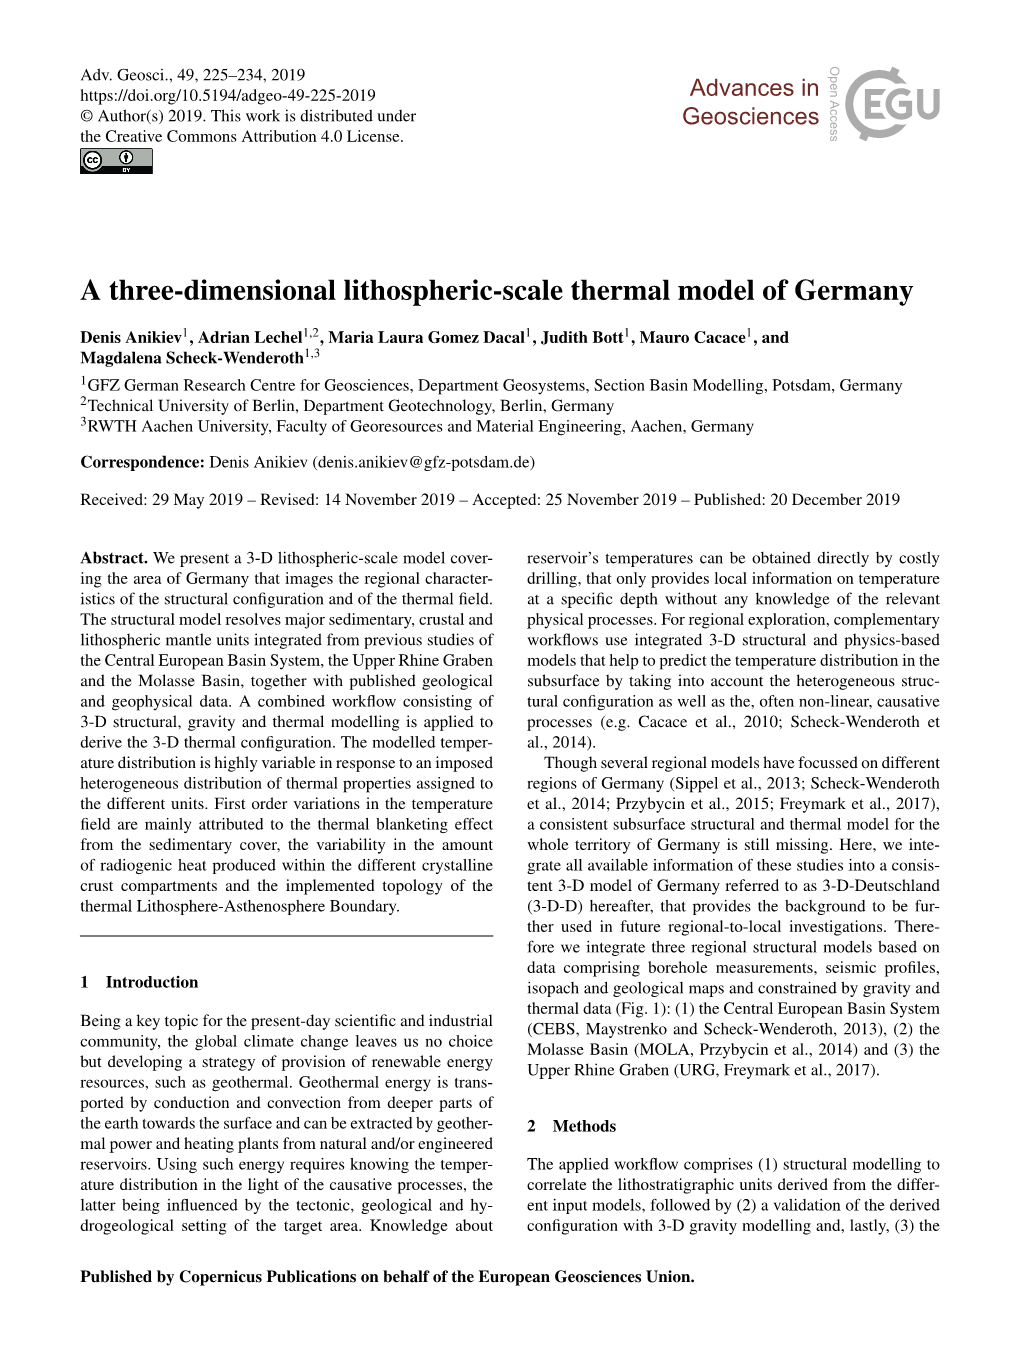 A Three-Dimensional Lithospheric-Scale Thermal Model of Germany